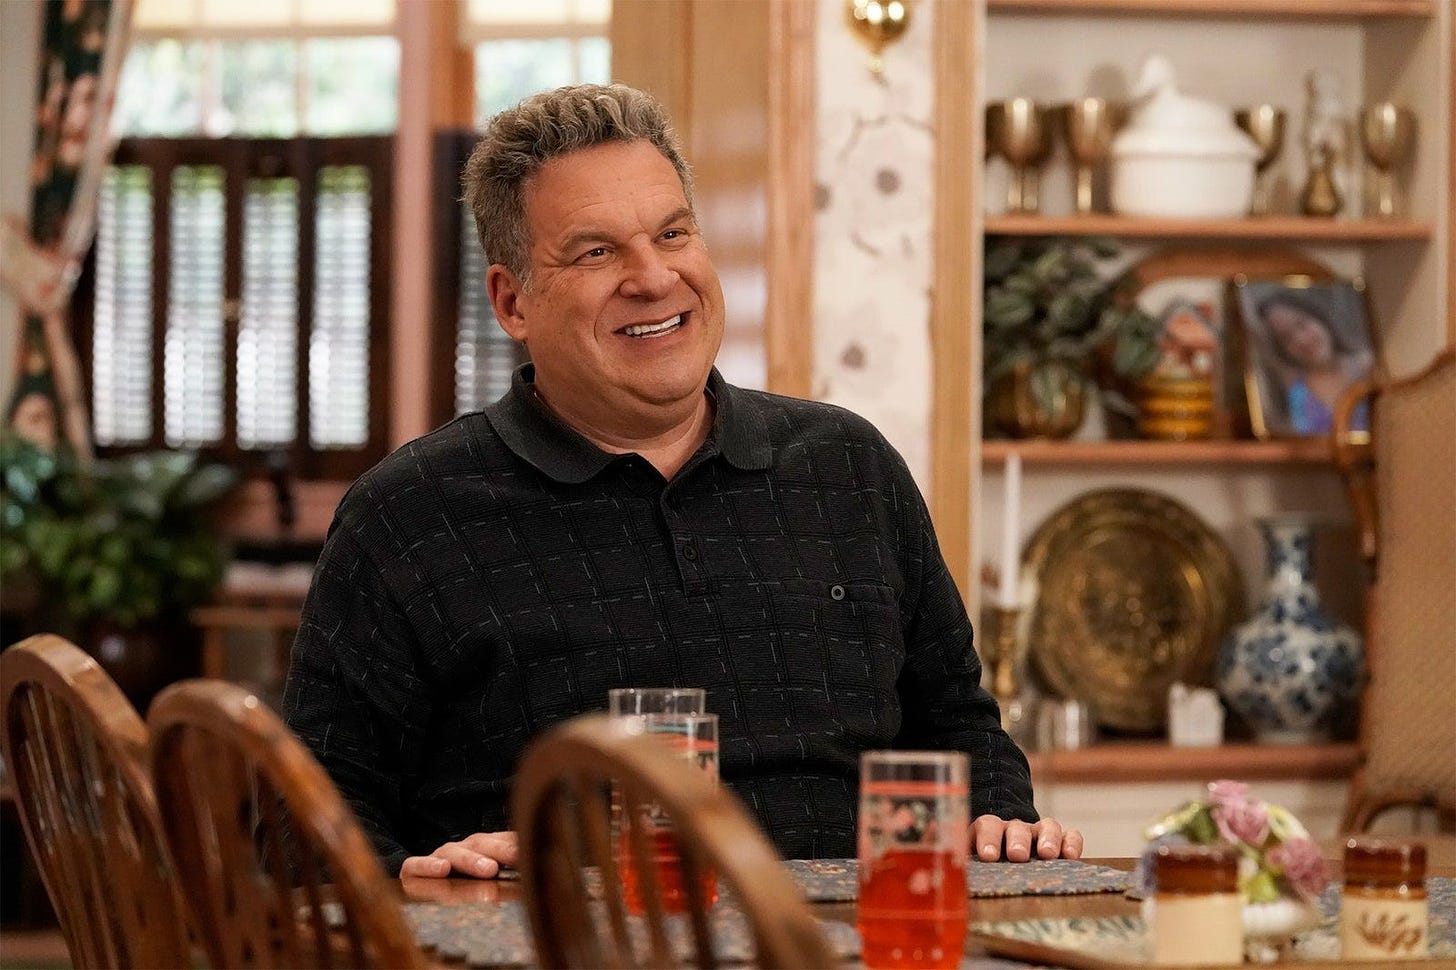 Is Jeff Garlin about to get cancelled?